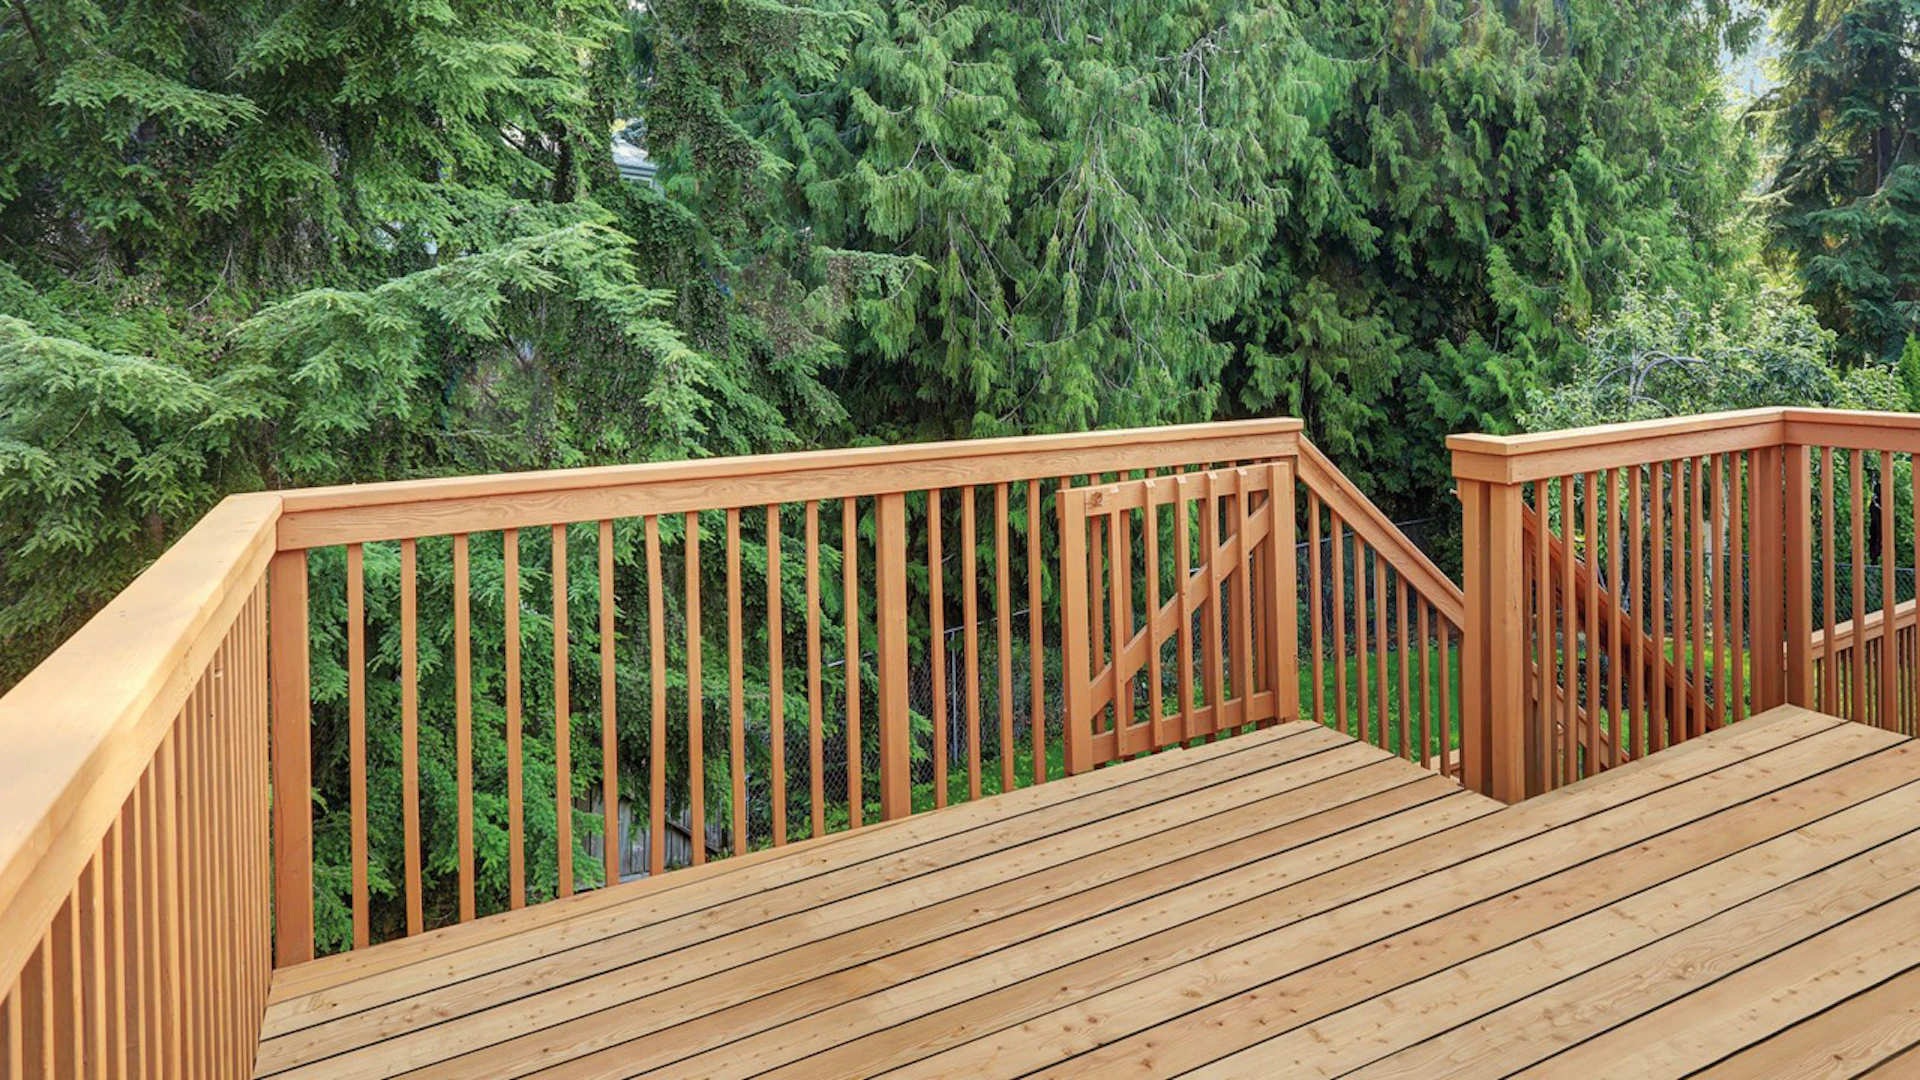 TerraWood wooden decking larch siberian A/B 28 x 142mm - smooth on both sides